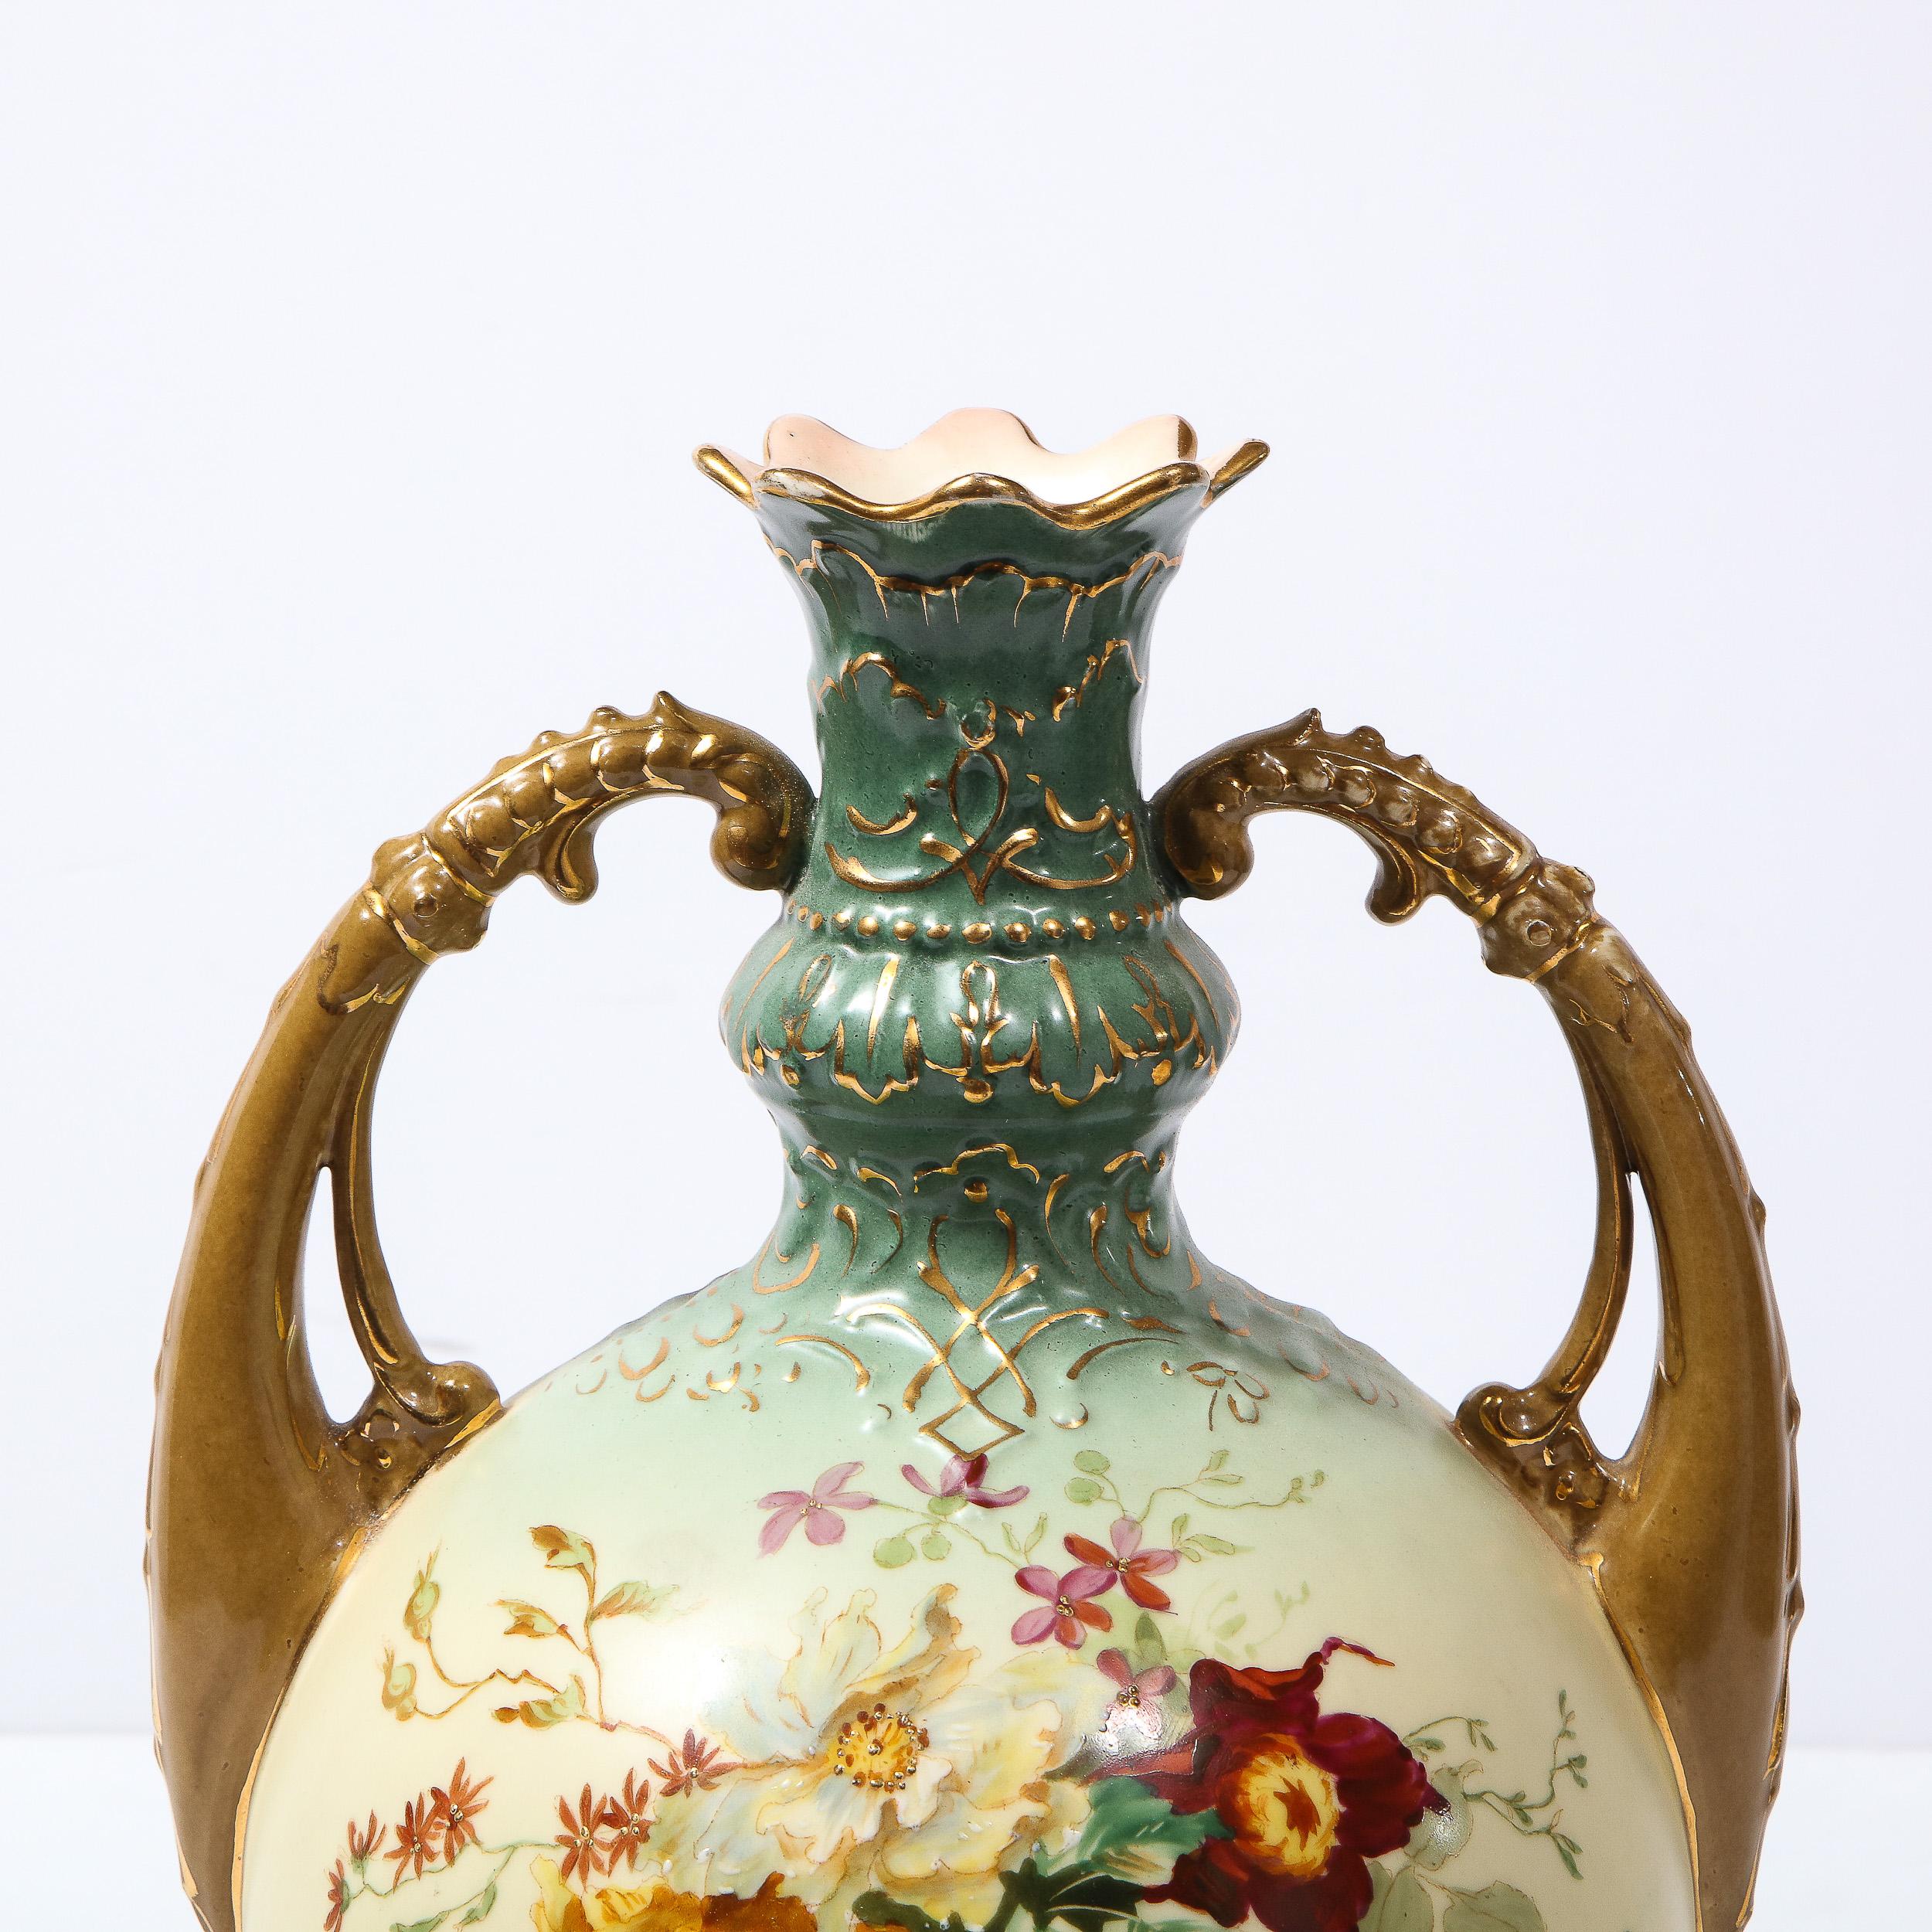 Austrian Antique Art Nouveau Hand Painted Handled Vase by EW In Excellent Condition For Sale In New York, NY